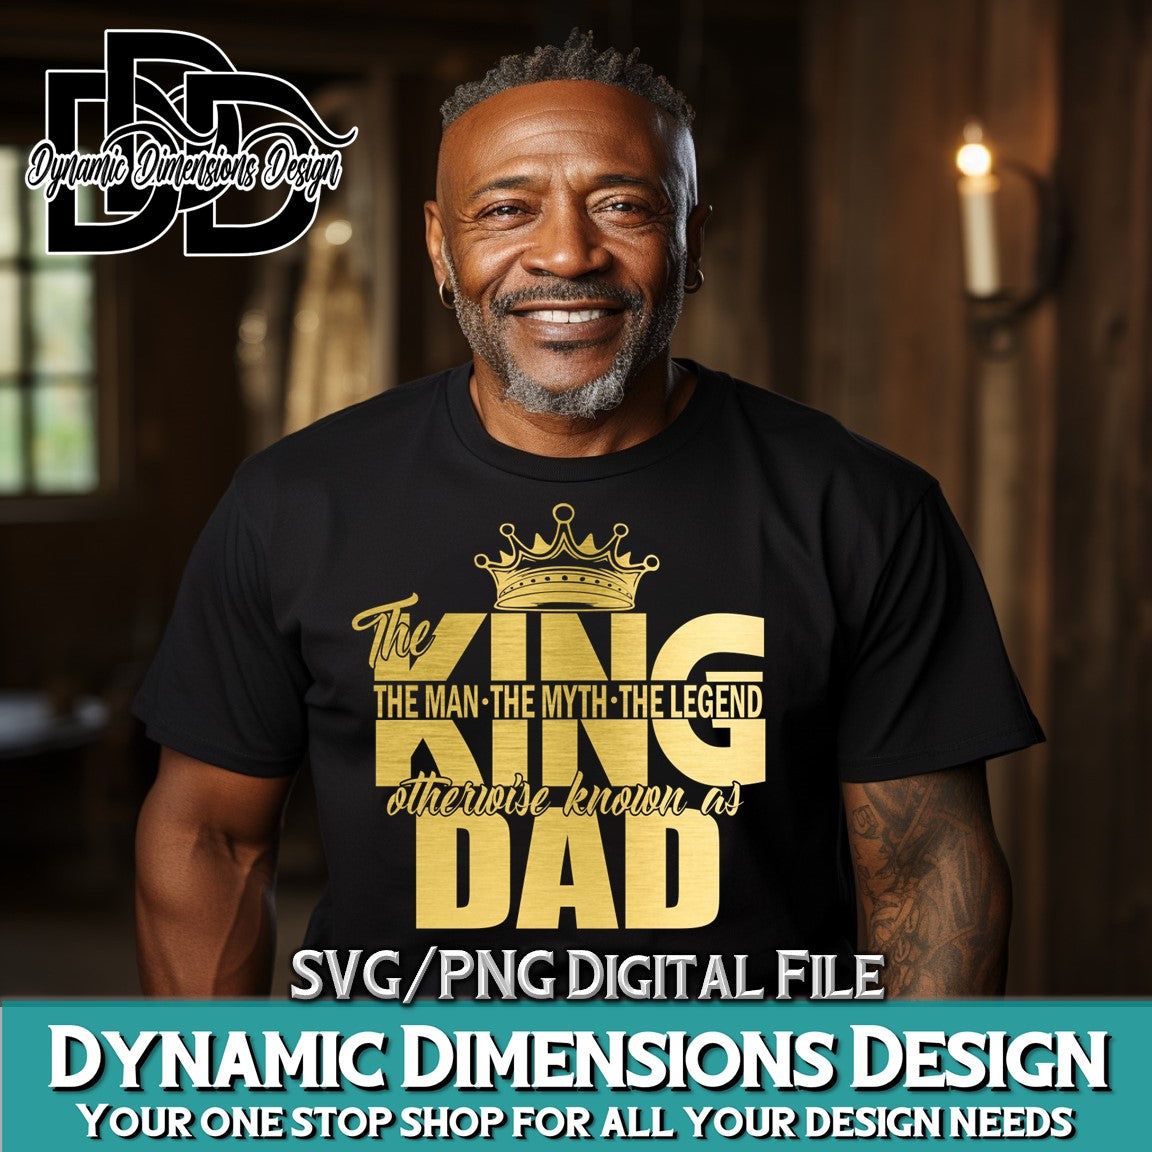 THE KING _ Dad The Man The Myth The Legend svg, png, instant download, dxf, eps, pdf, jpg, cricut, silhouette, sublimtion, printable